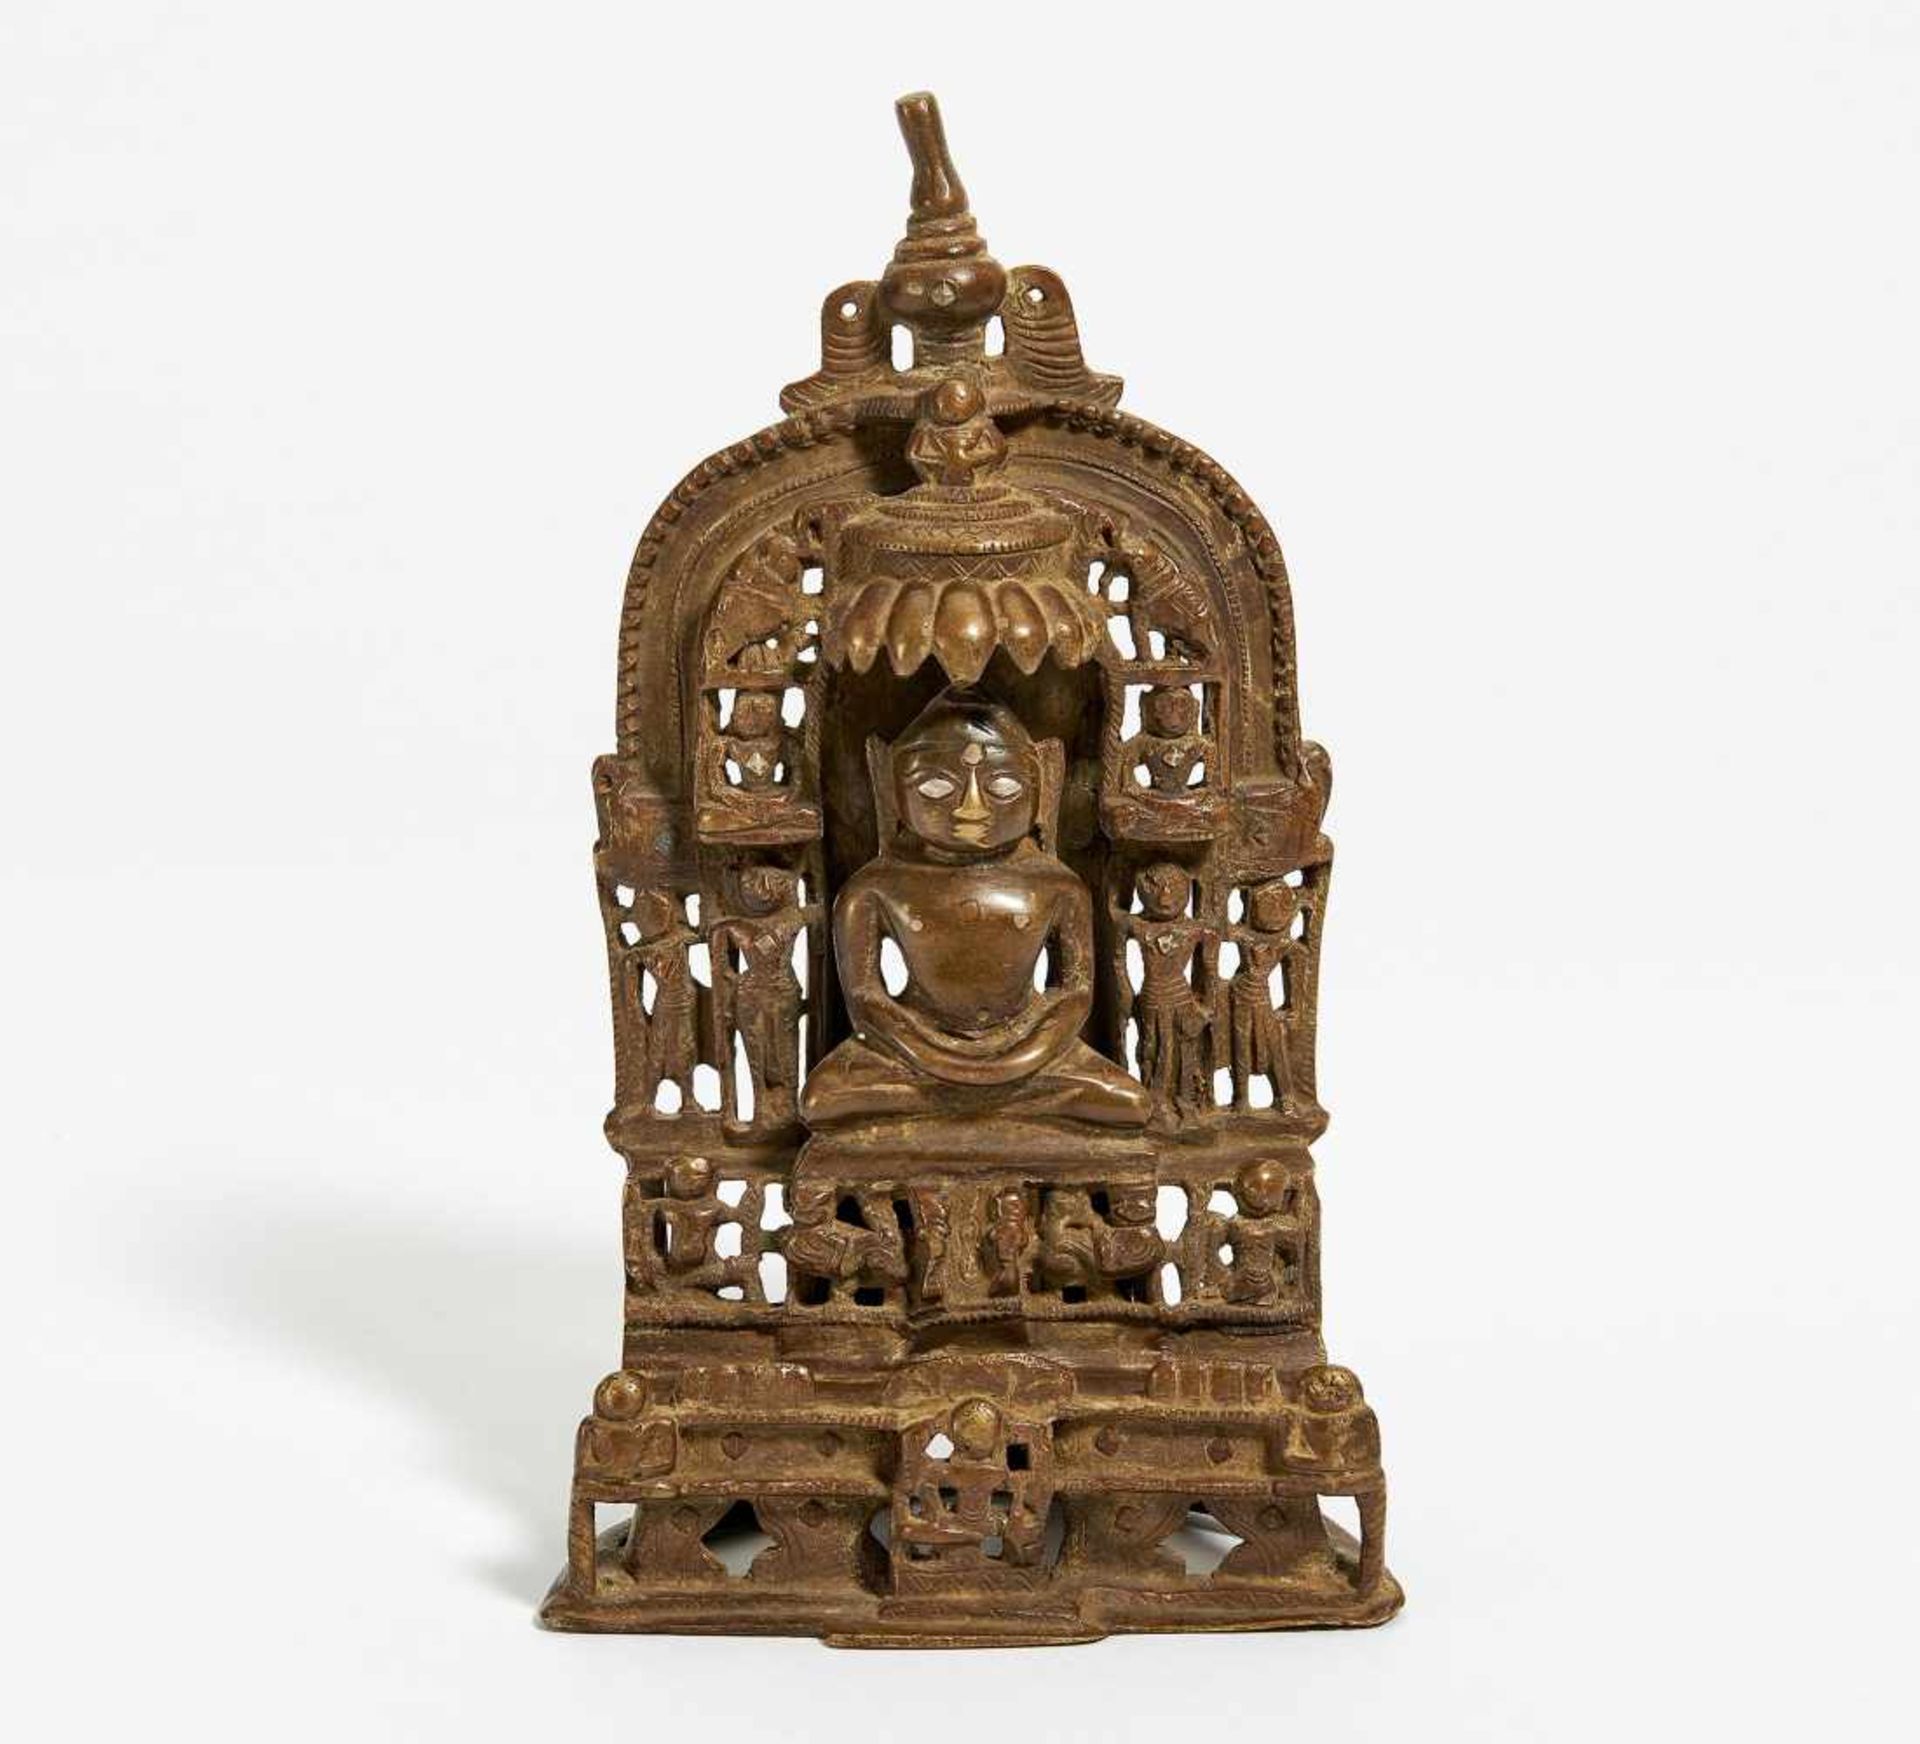 TIRTHANKARA ALTAR. India. Jain. Copper bronze with inlays from copper, silver and residue of